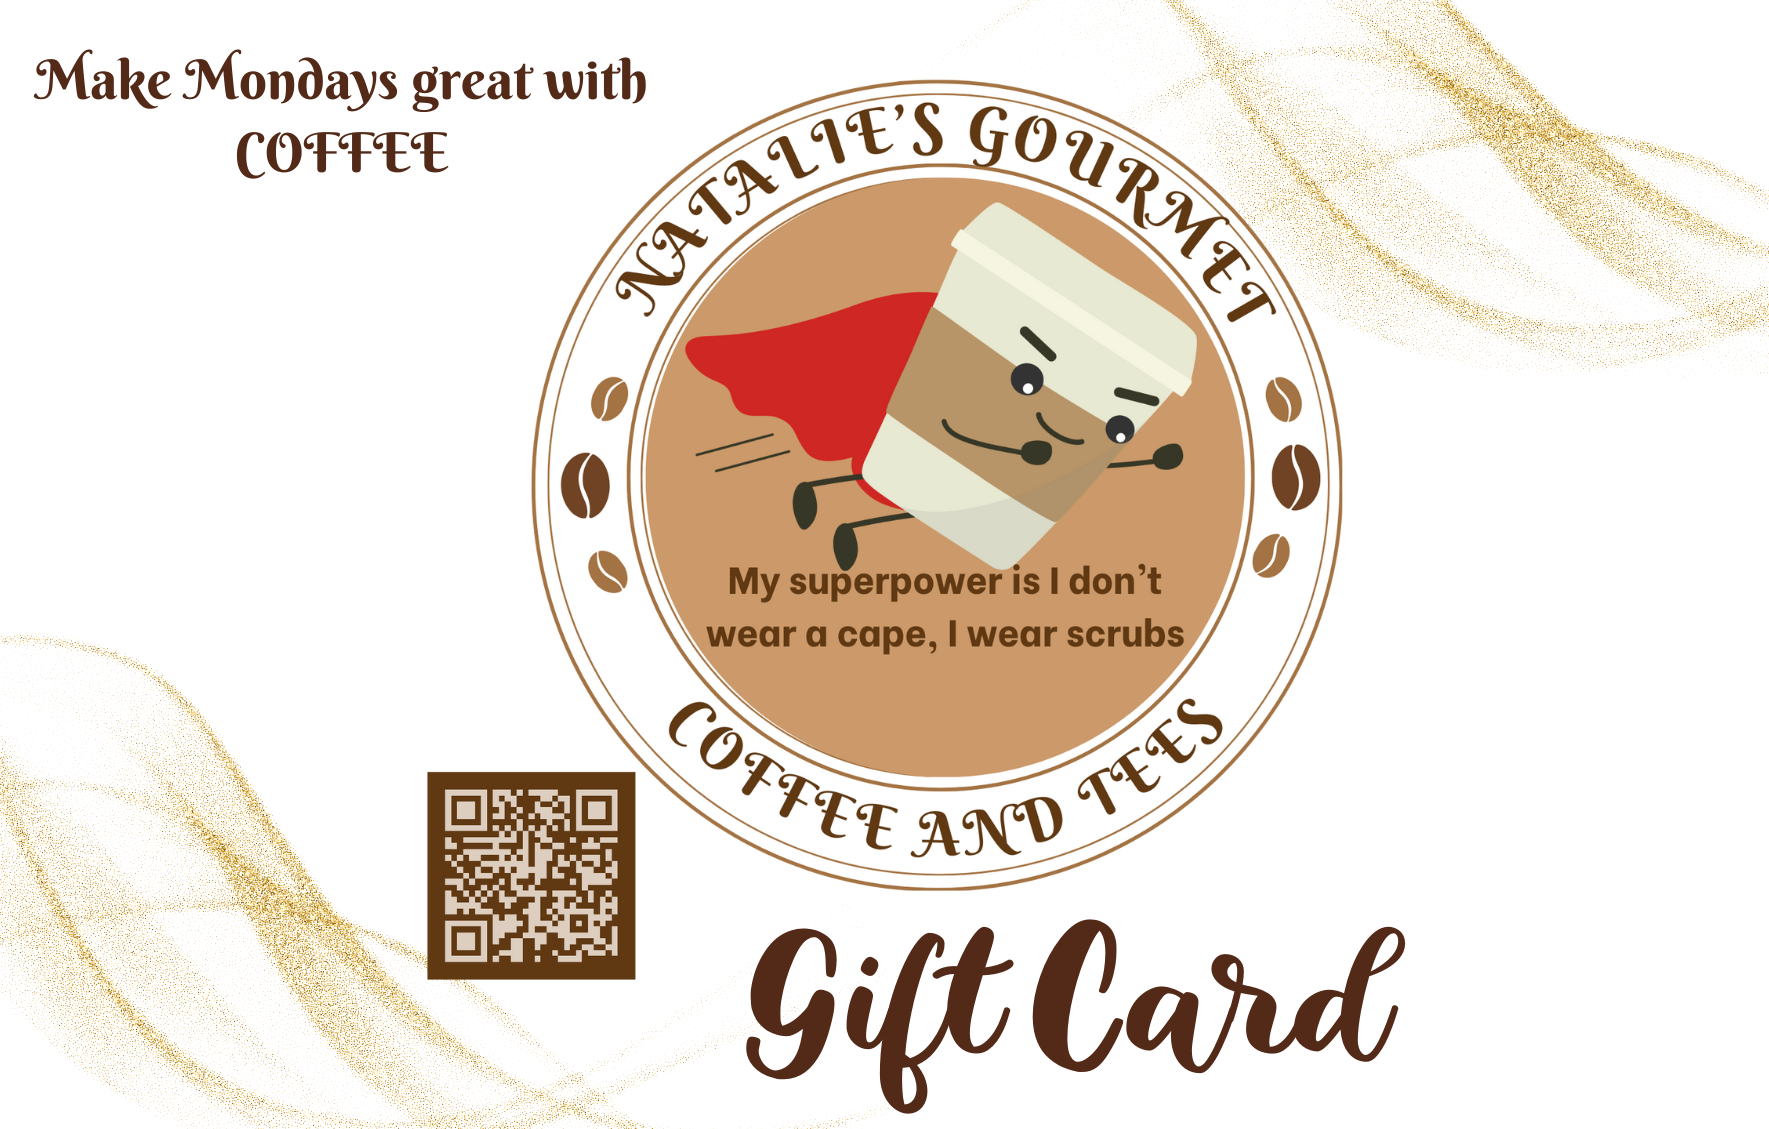 Natalie's Gourmet Coffee and Tees Gift Card - Natalie's Gourmet Coffee and Tees